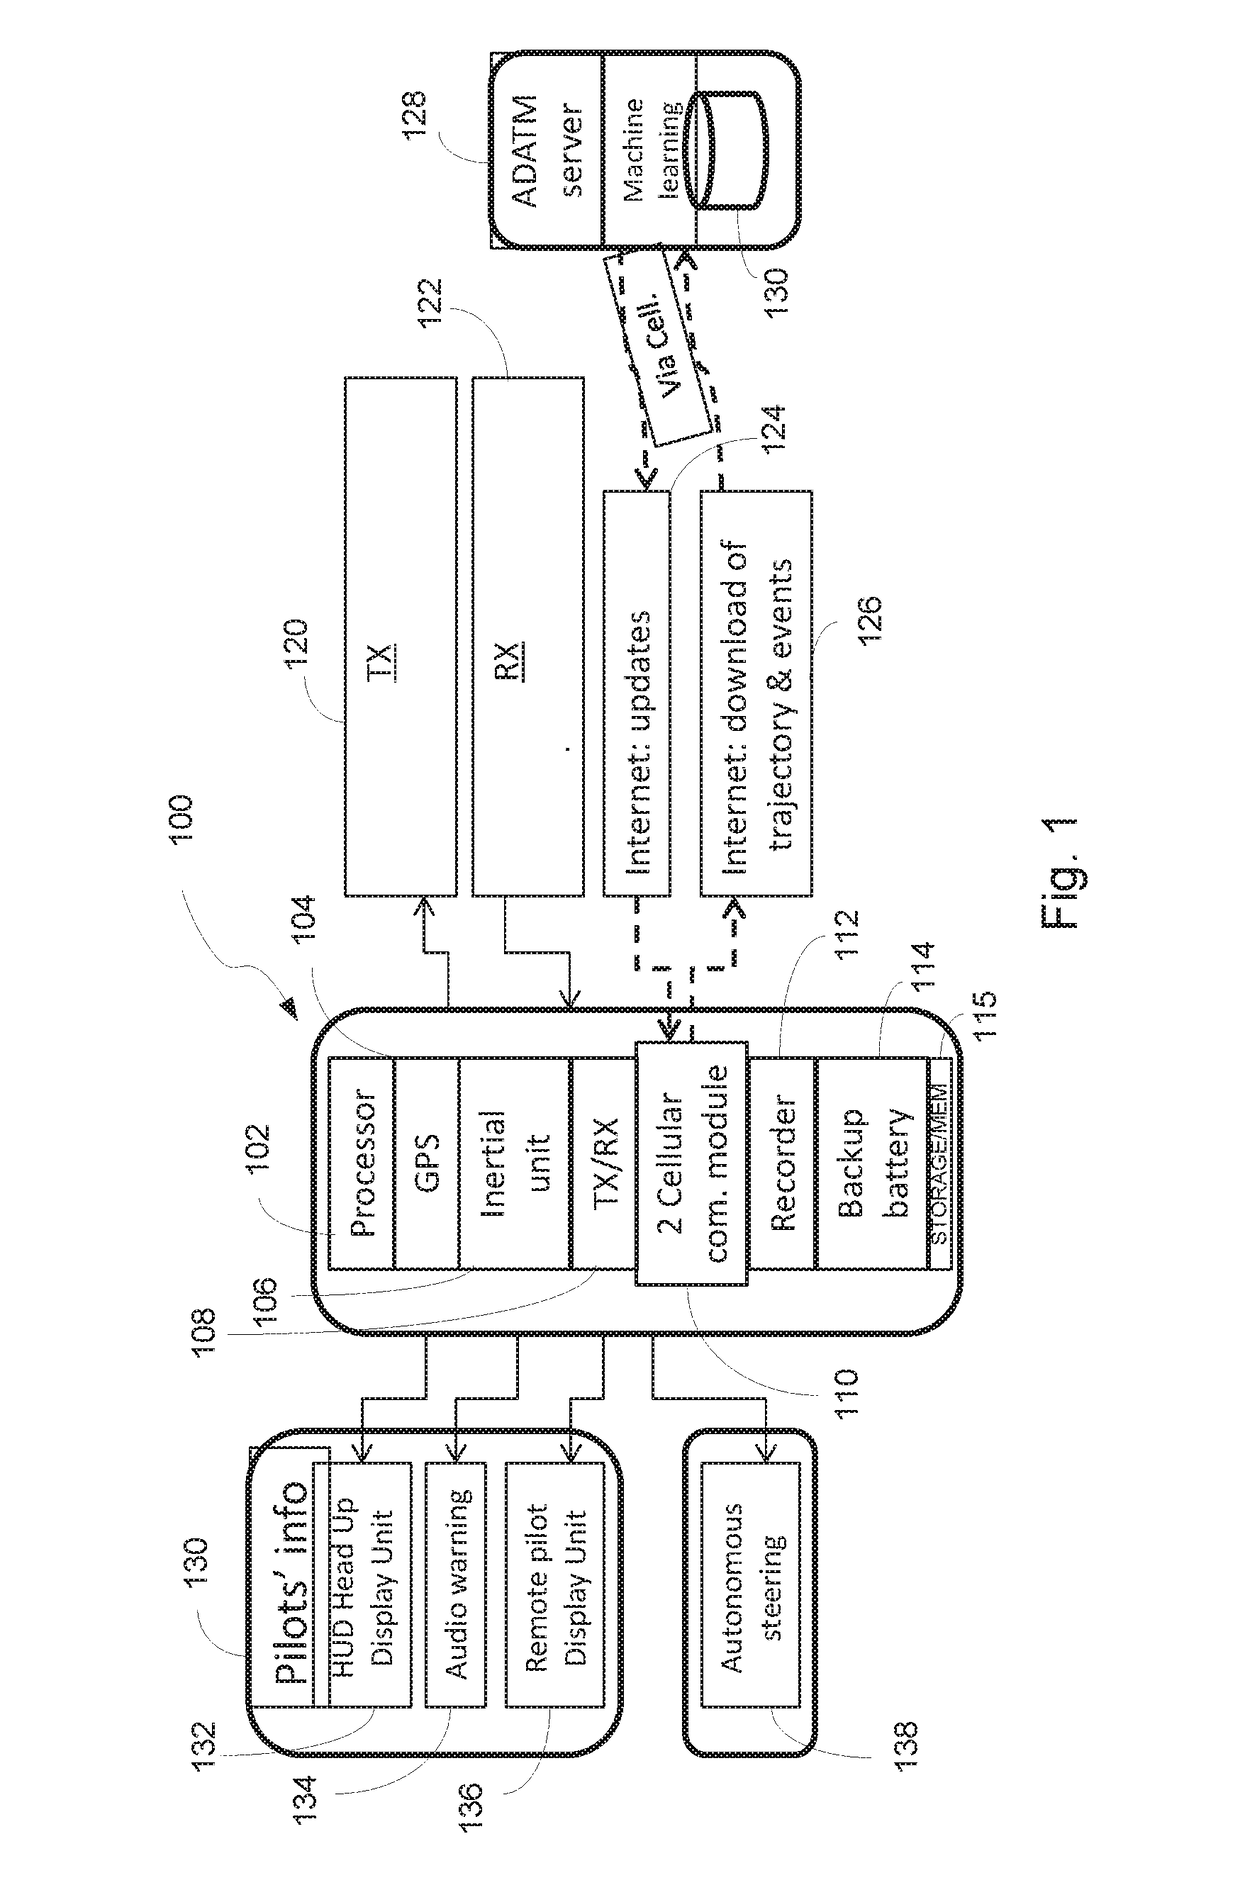 Method and system for autonomous dynamic air traffic management